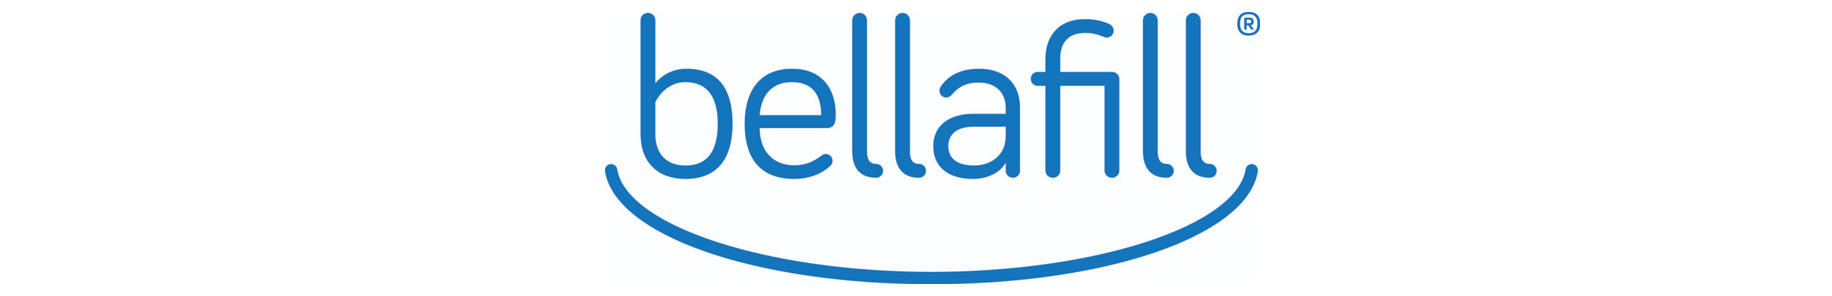 The Lip Doctor's logo paired with the Bellafill #1 User in Canada Award, illustrating excellence in long-lasting skin perfection treatments.